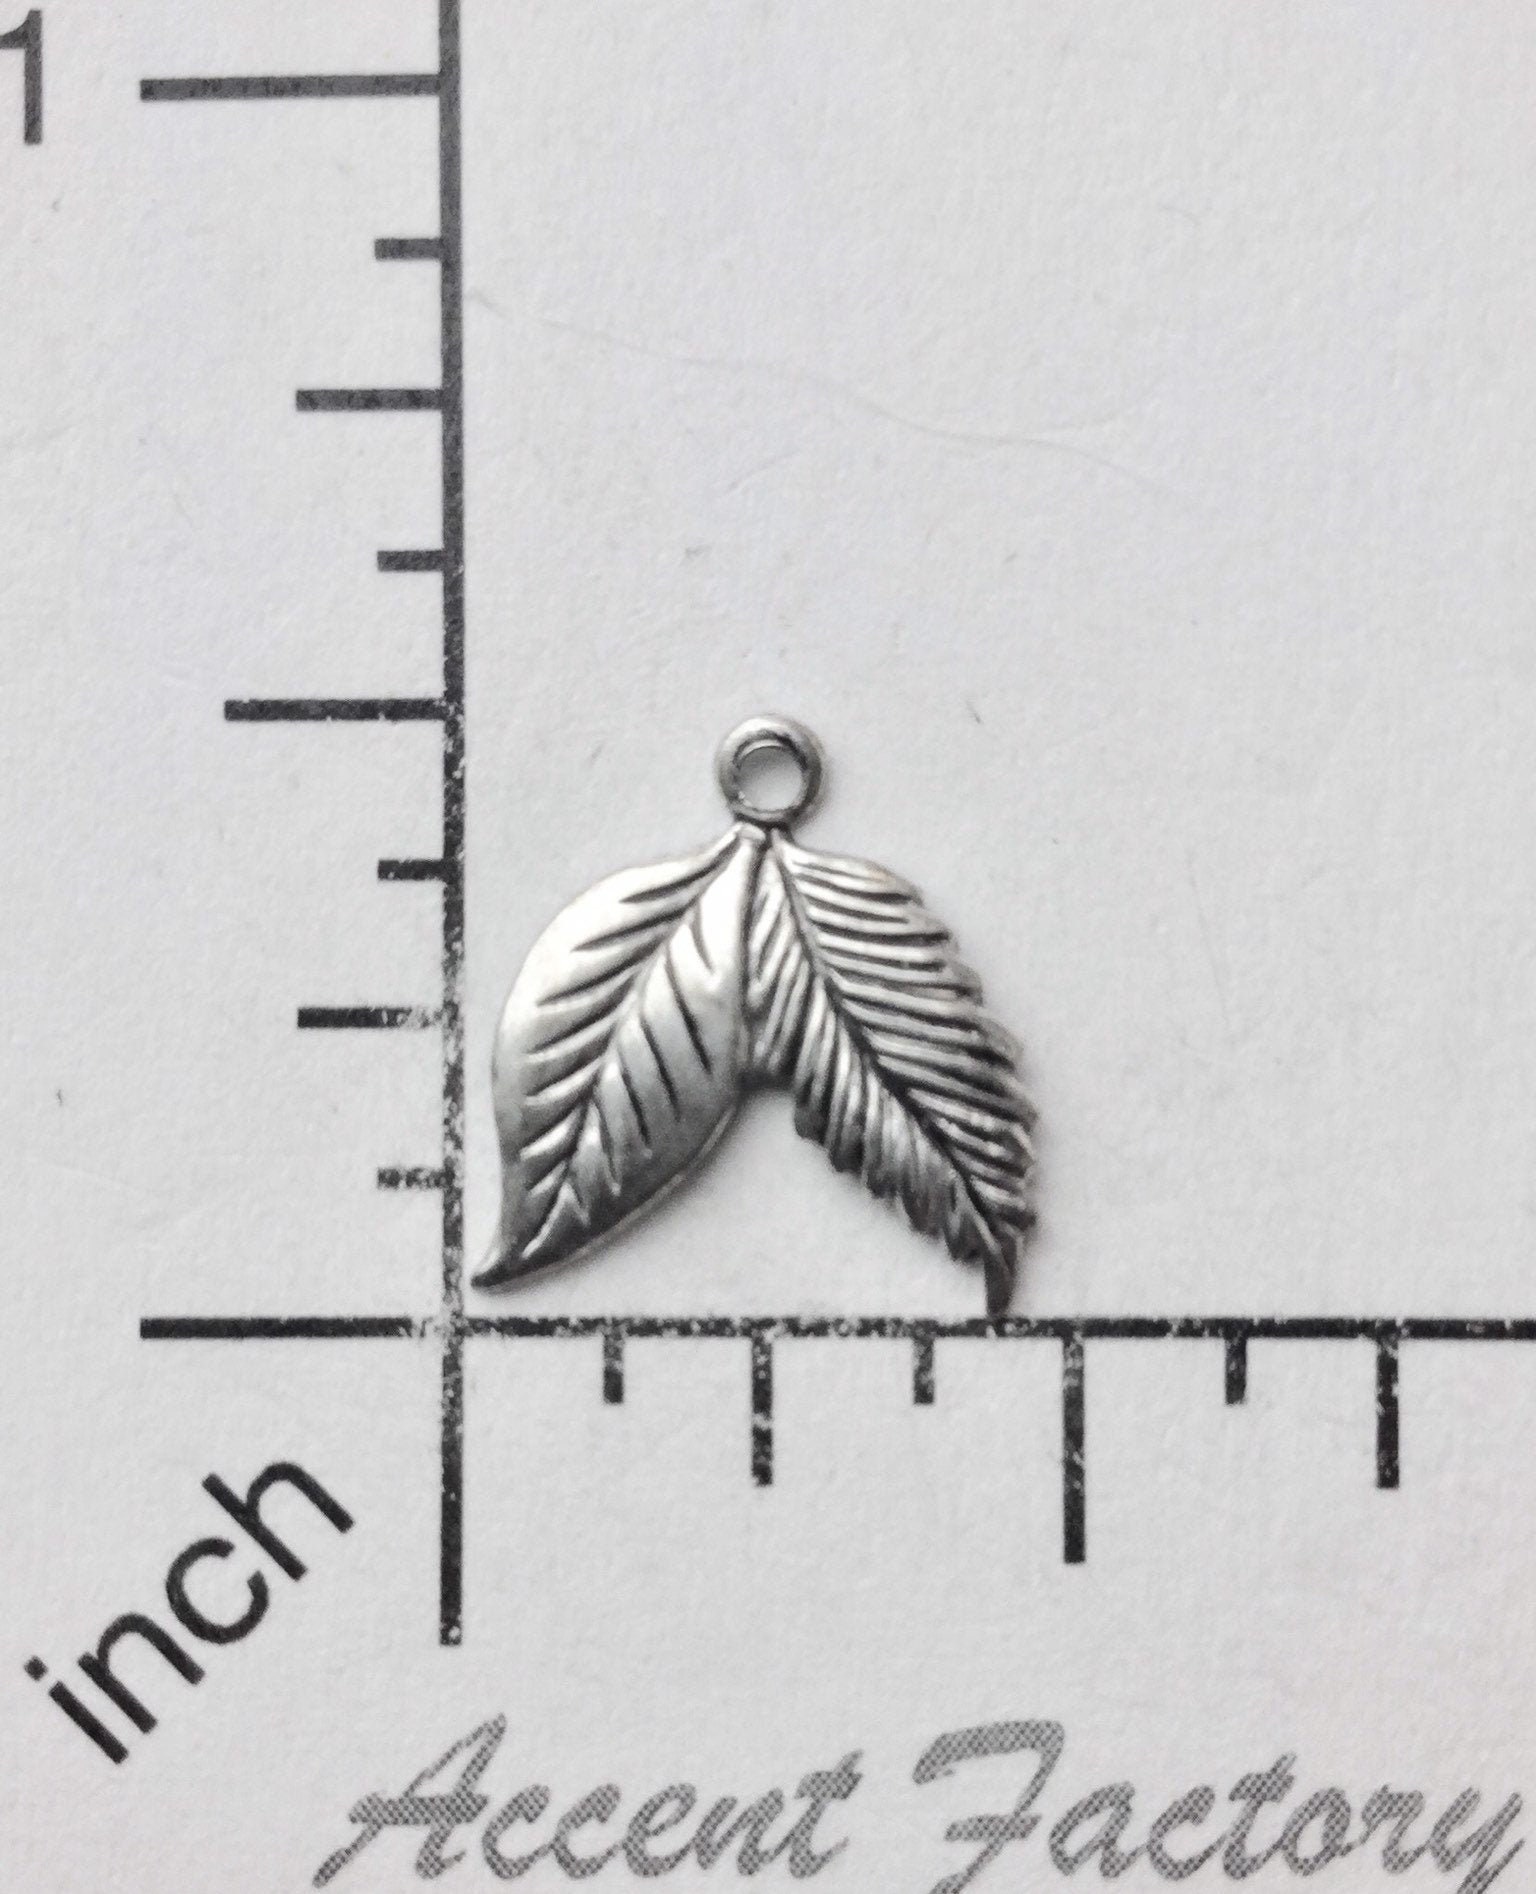 33144         4 Pc.Matte Silver Oxidized Small Leaf Jewelry Finding Charm 